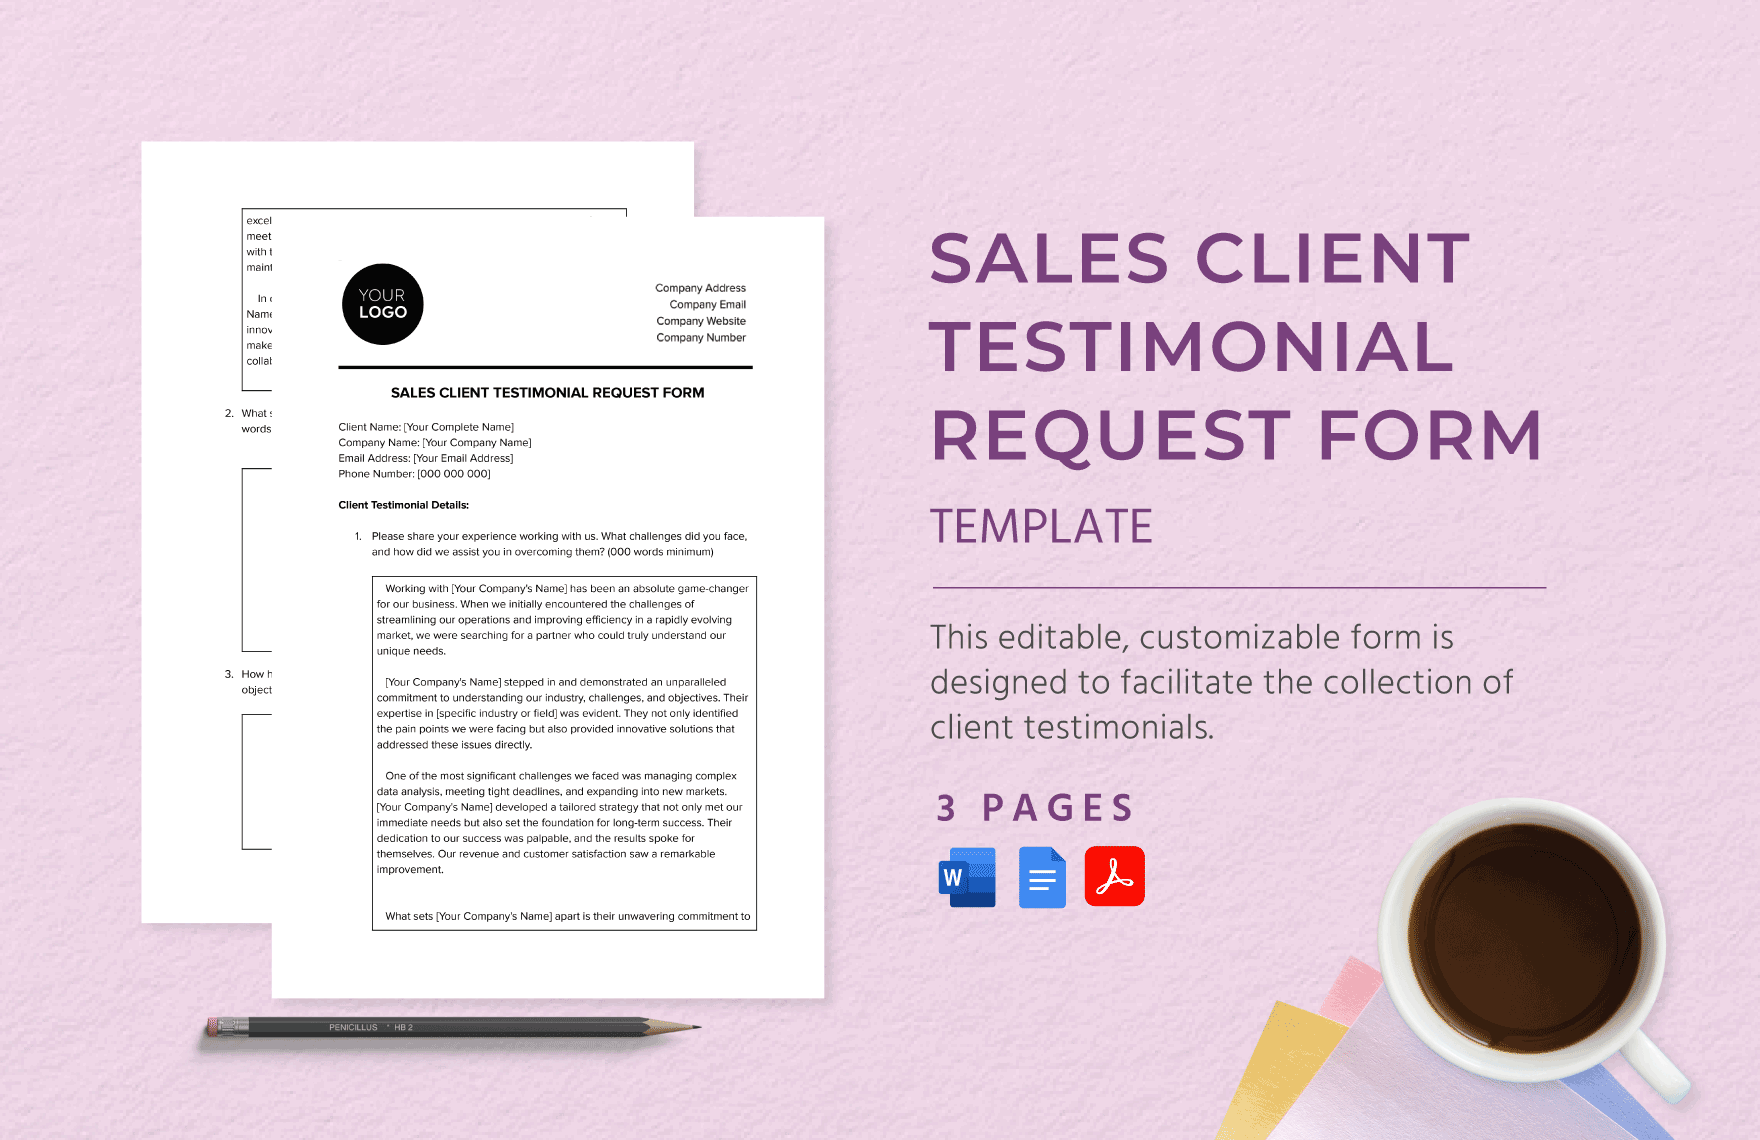 Sales Client Testimonial Request Form Template in Word, Google Docs, PDF